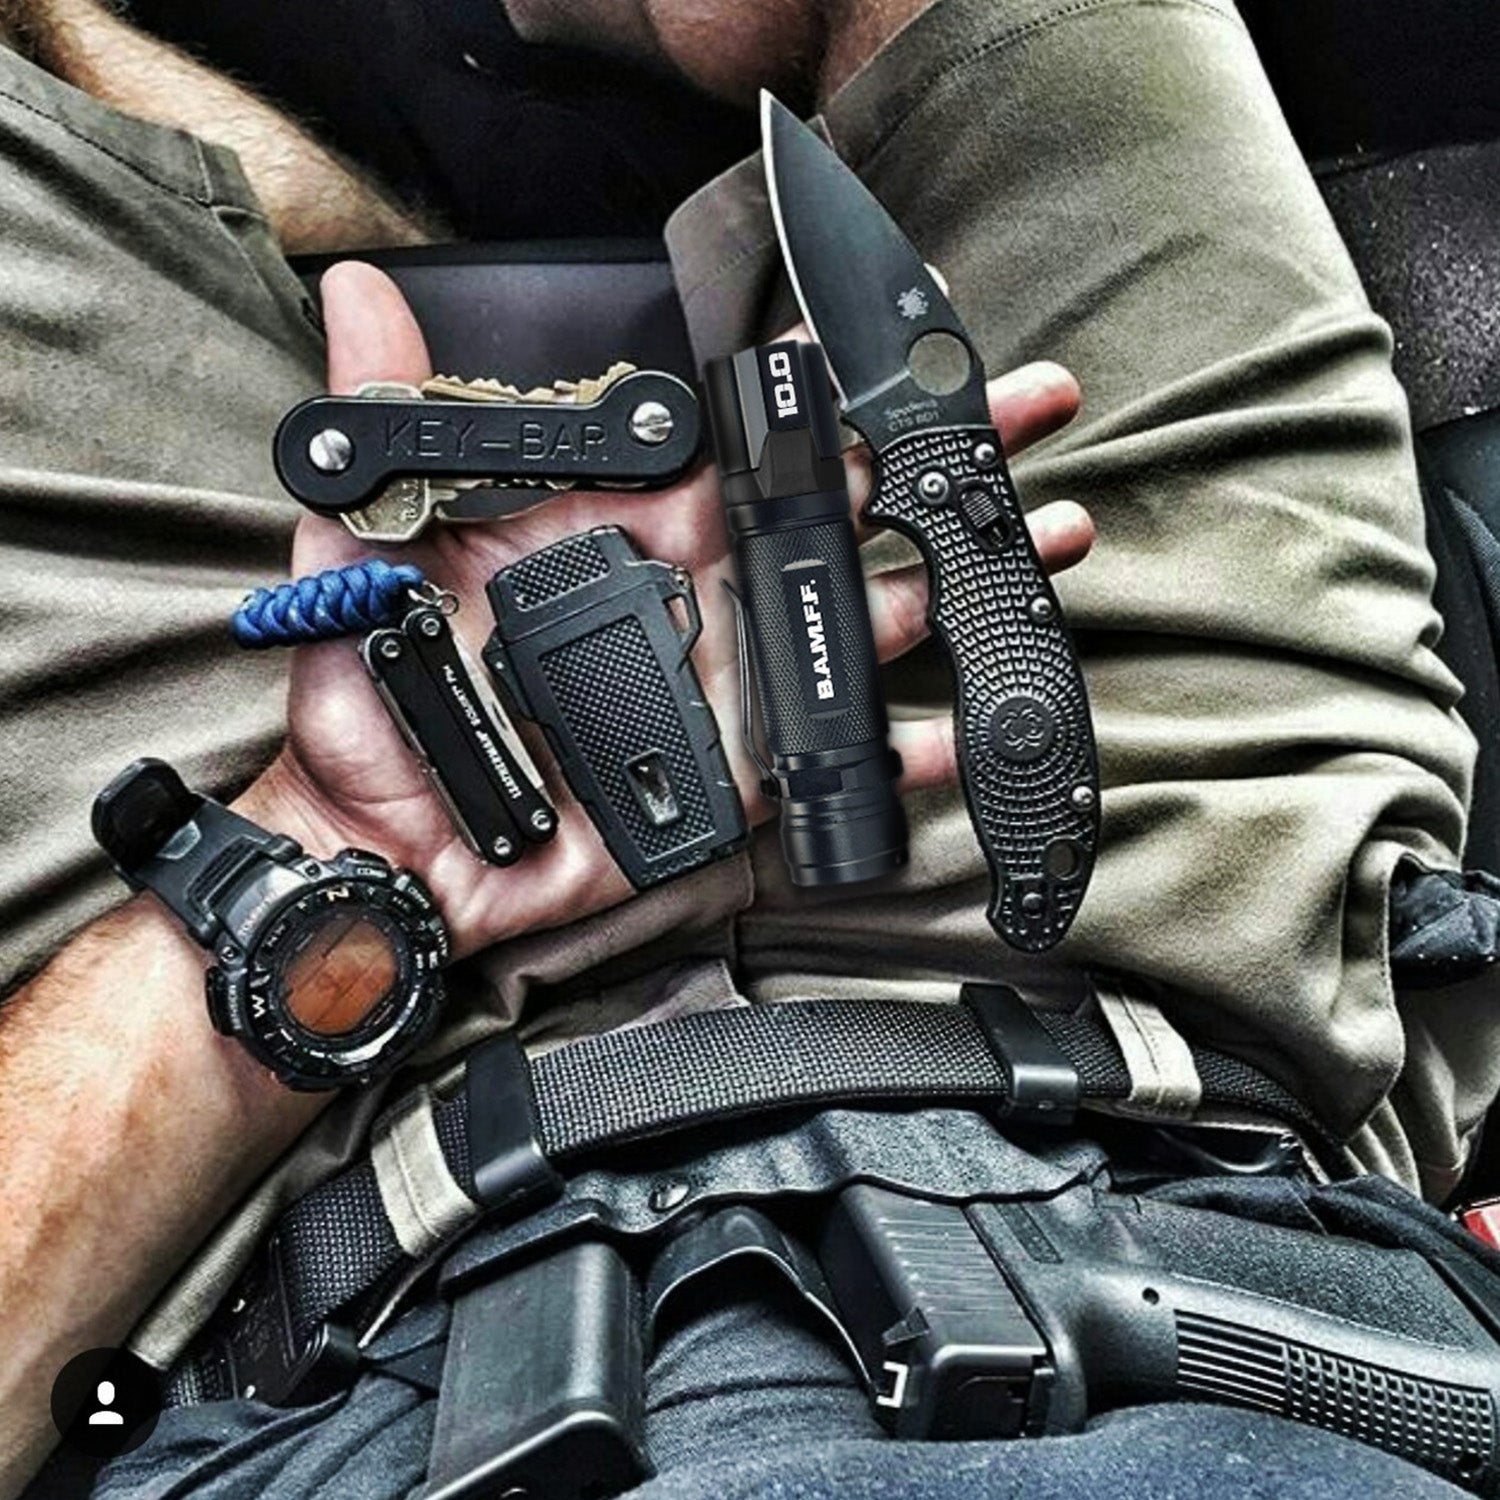 POV image looking into a male's lap full of tactical gear including a gun, knife, multi-tool, BAMFF 10 tactical flashlight, and more